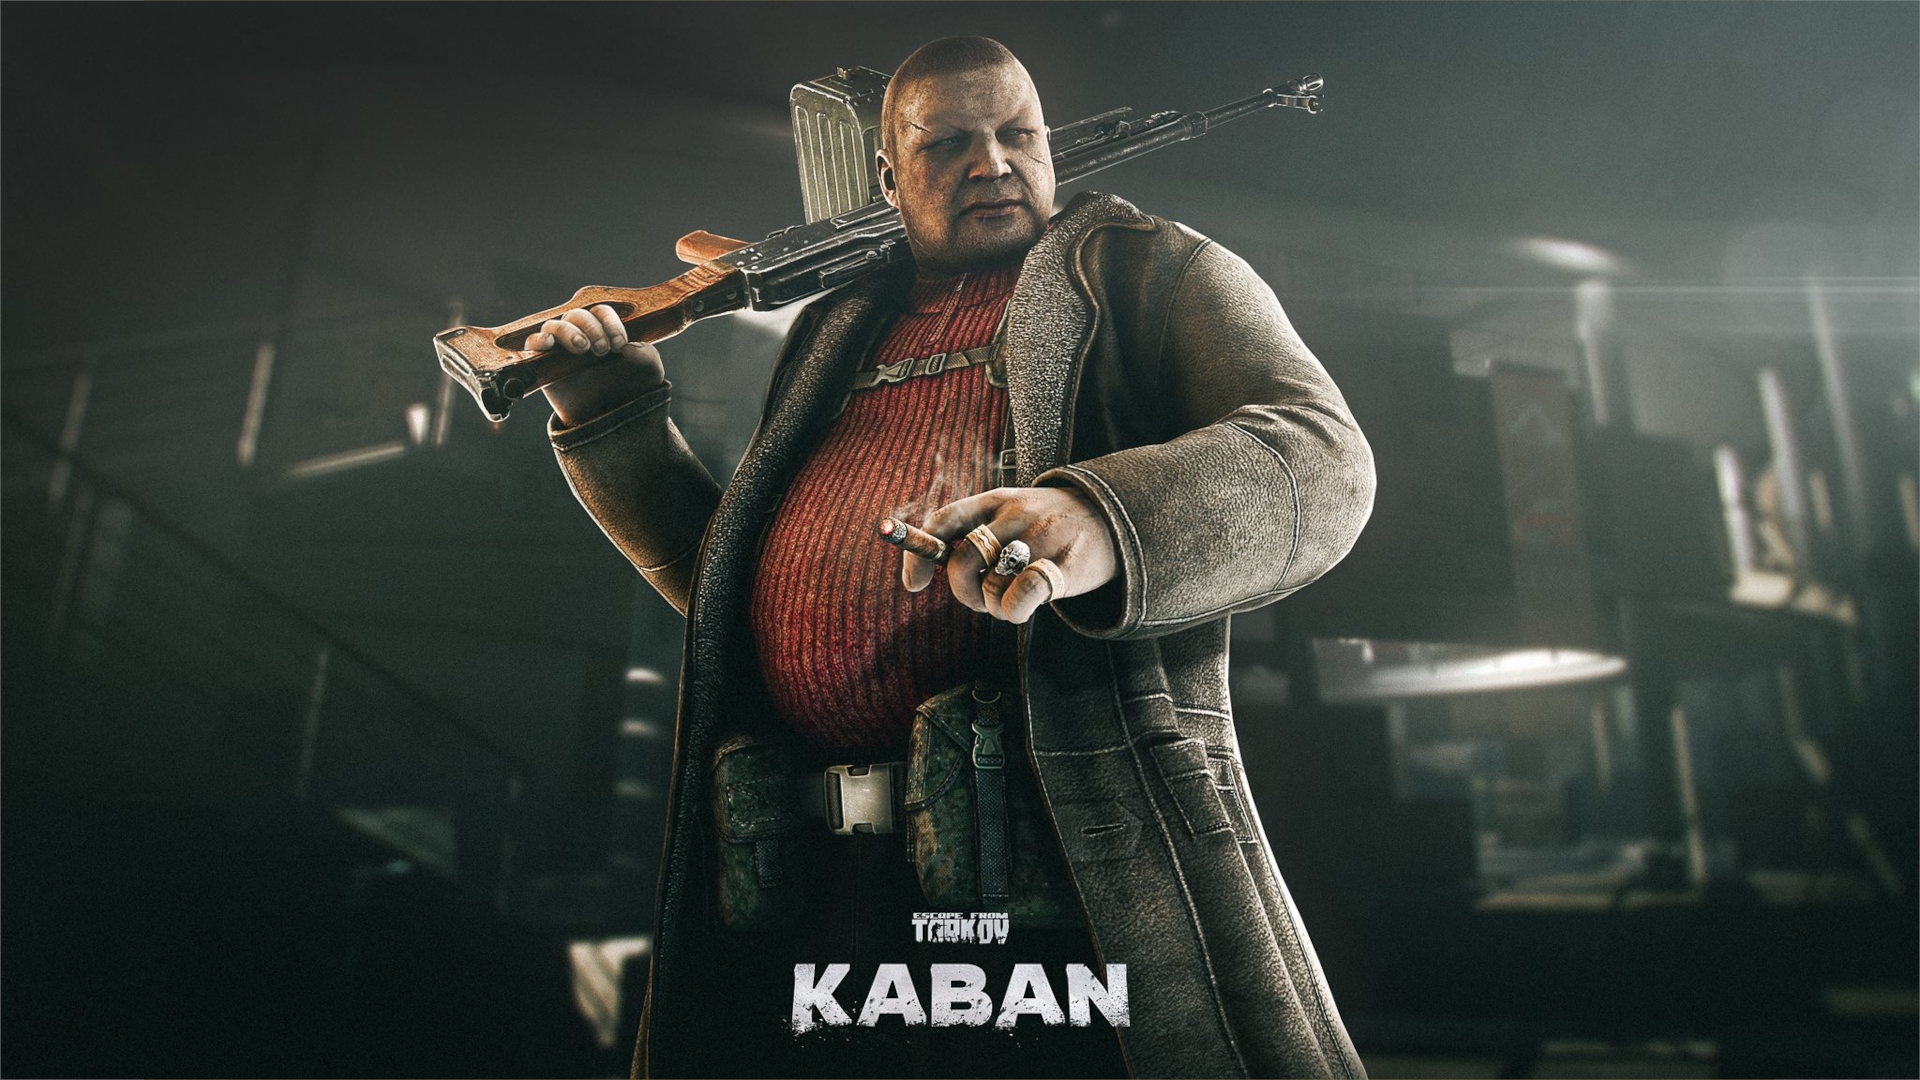 How to find and defeat Kaban in Escape from Tarkov